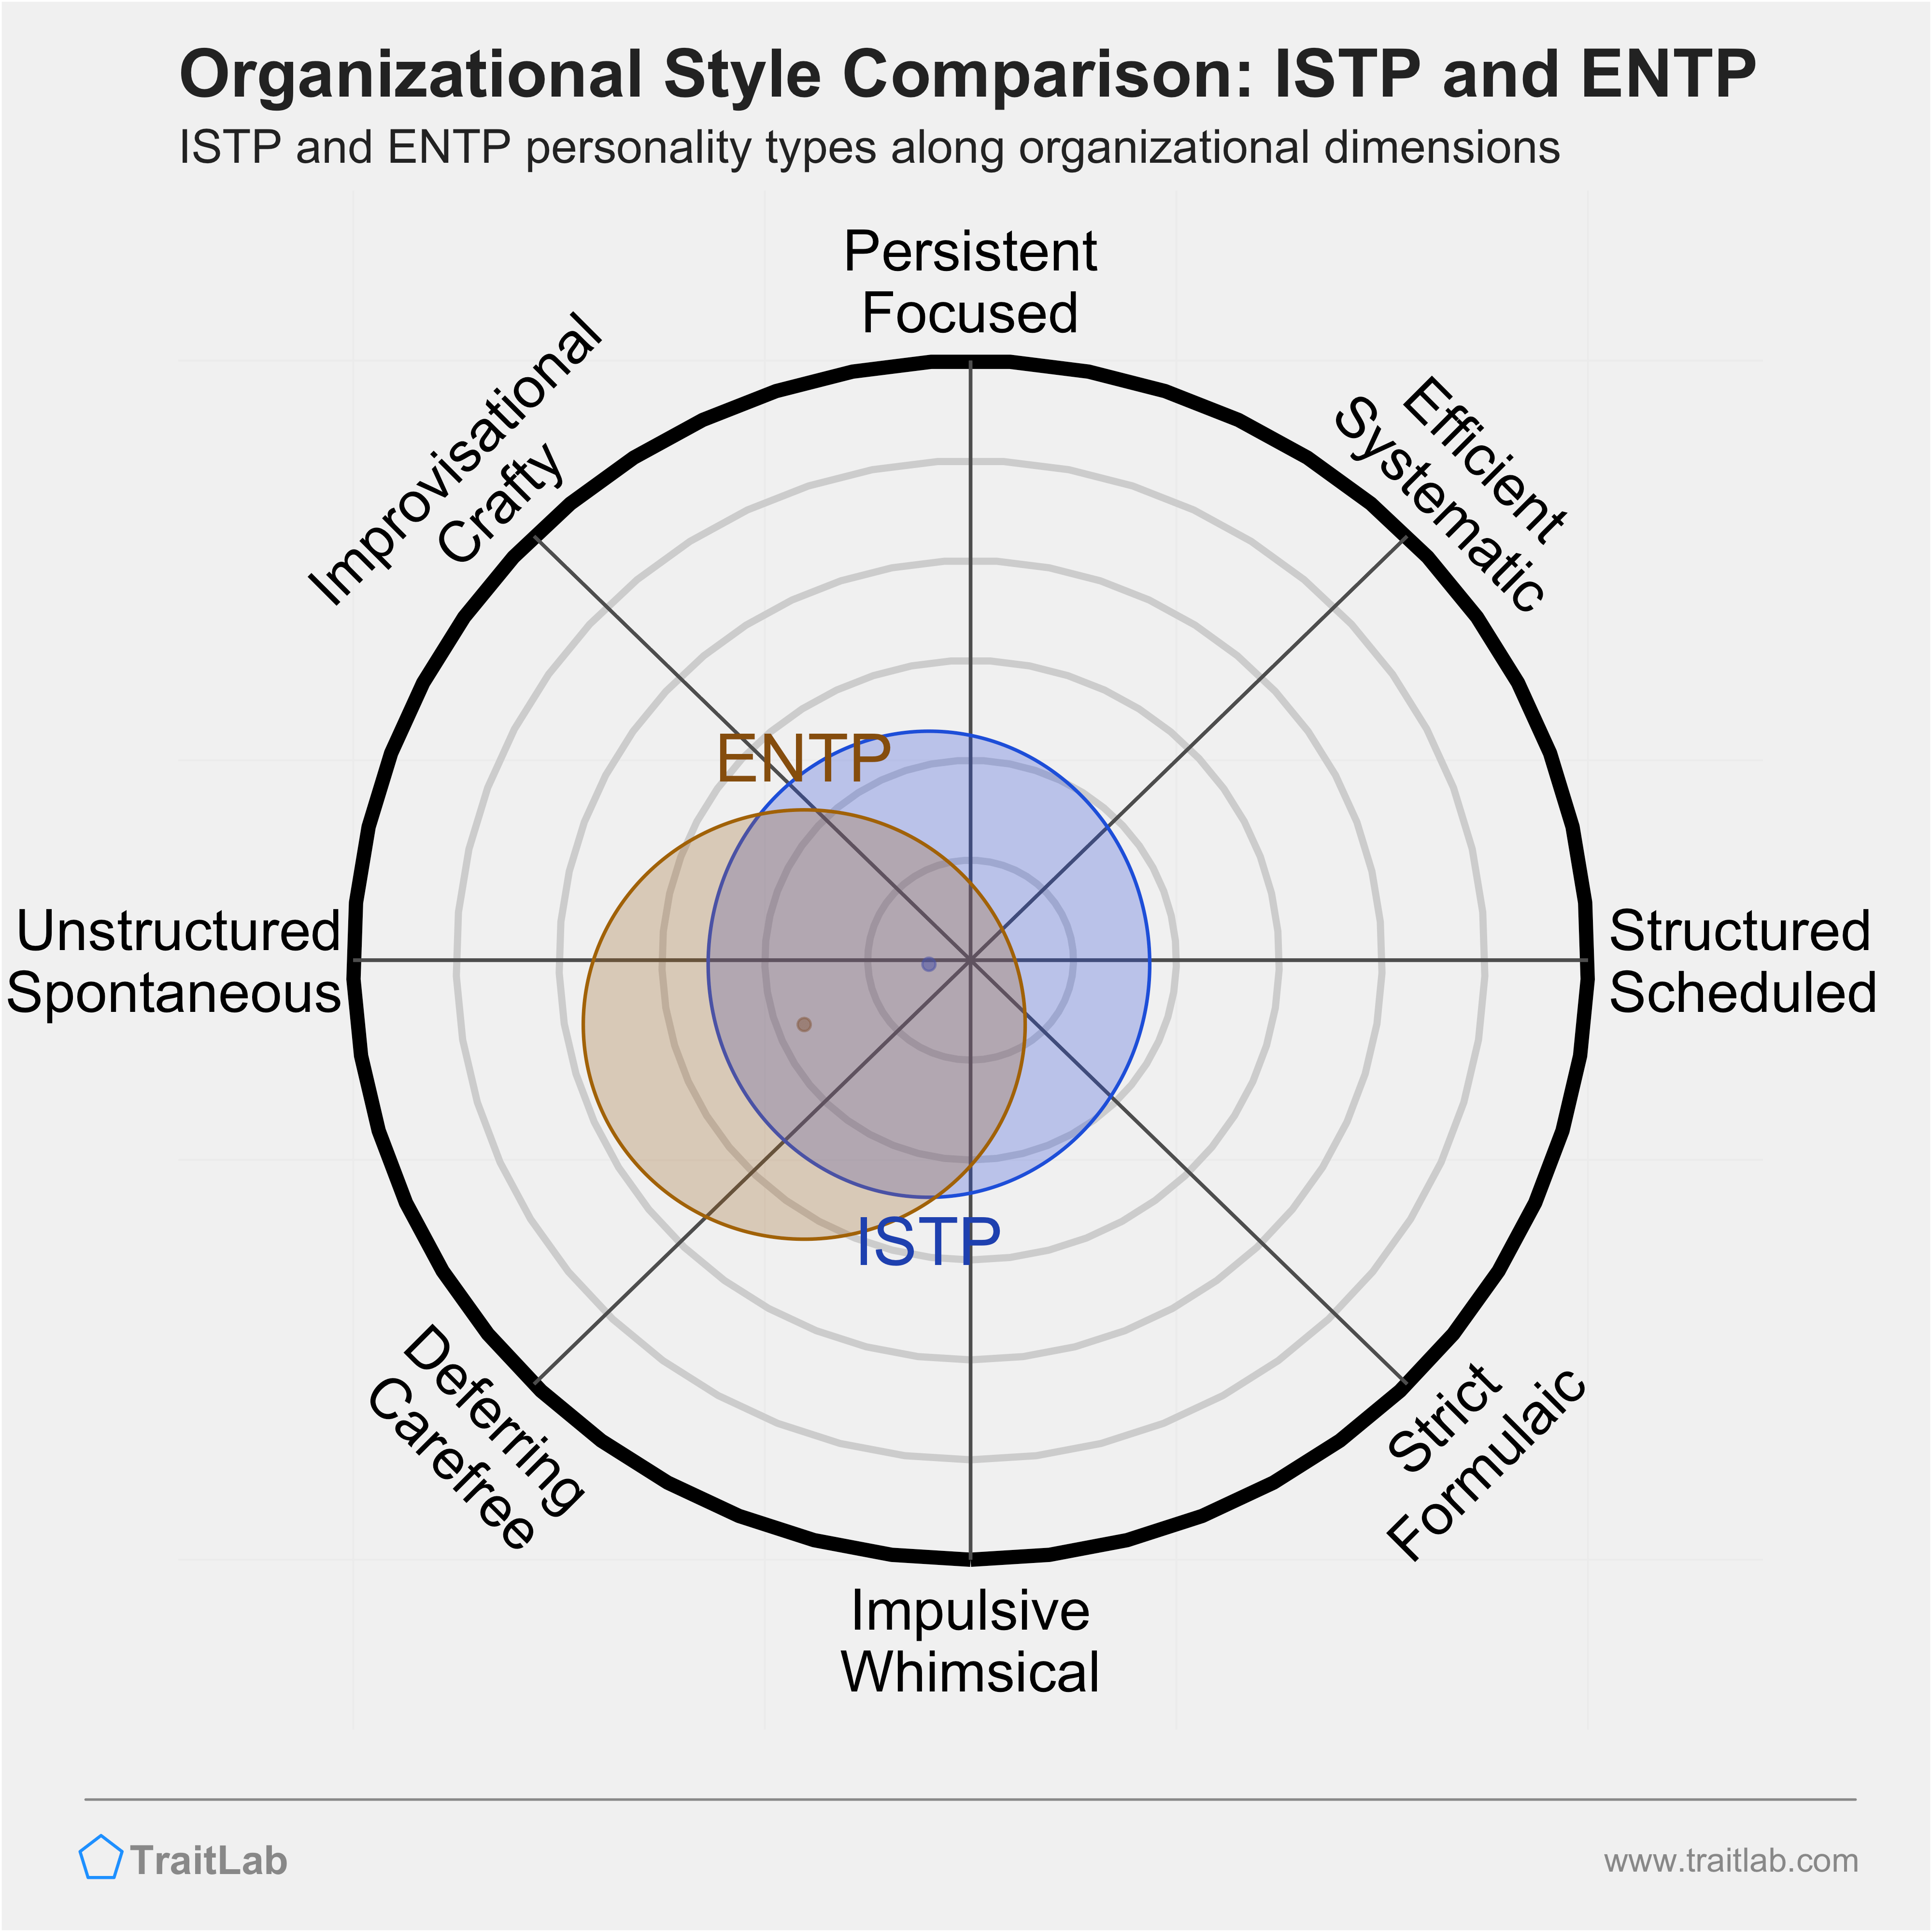 ISTP and ENTP comparison across organizational dimensions